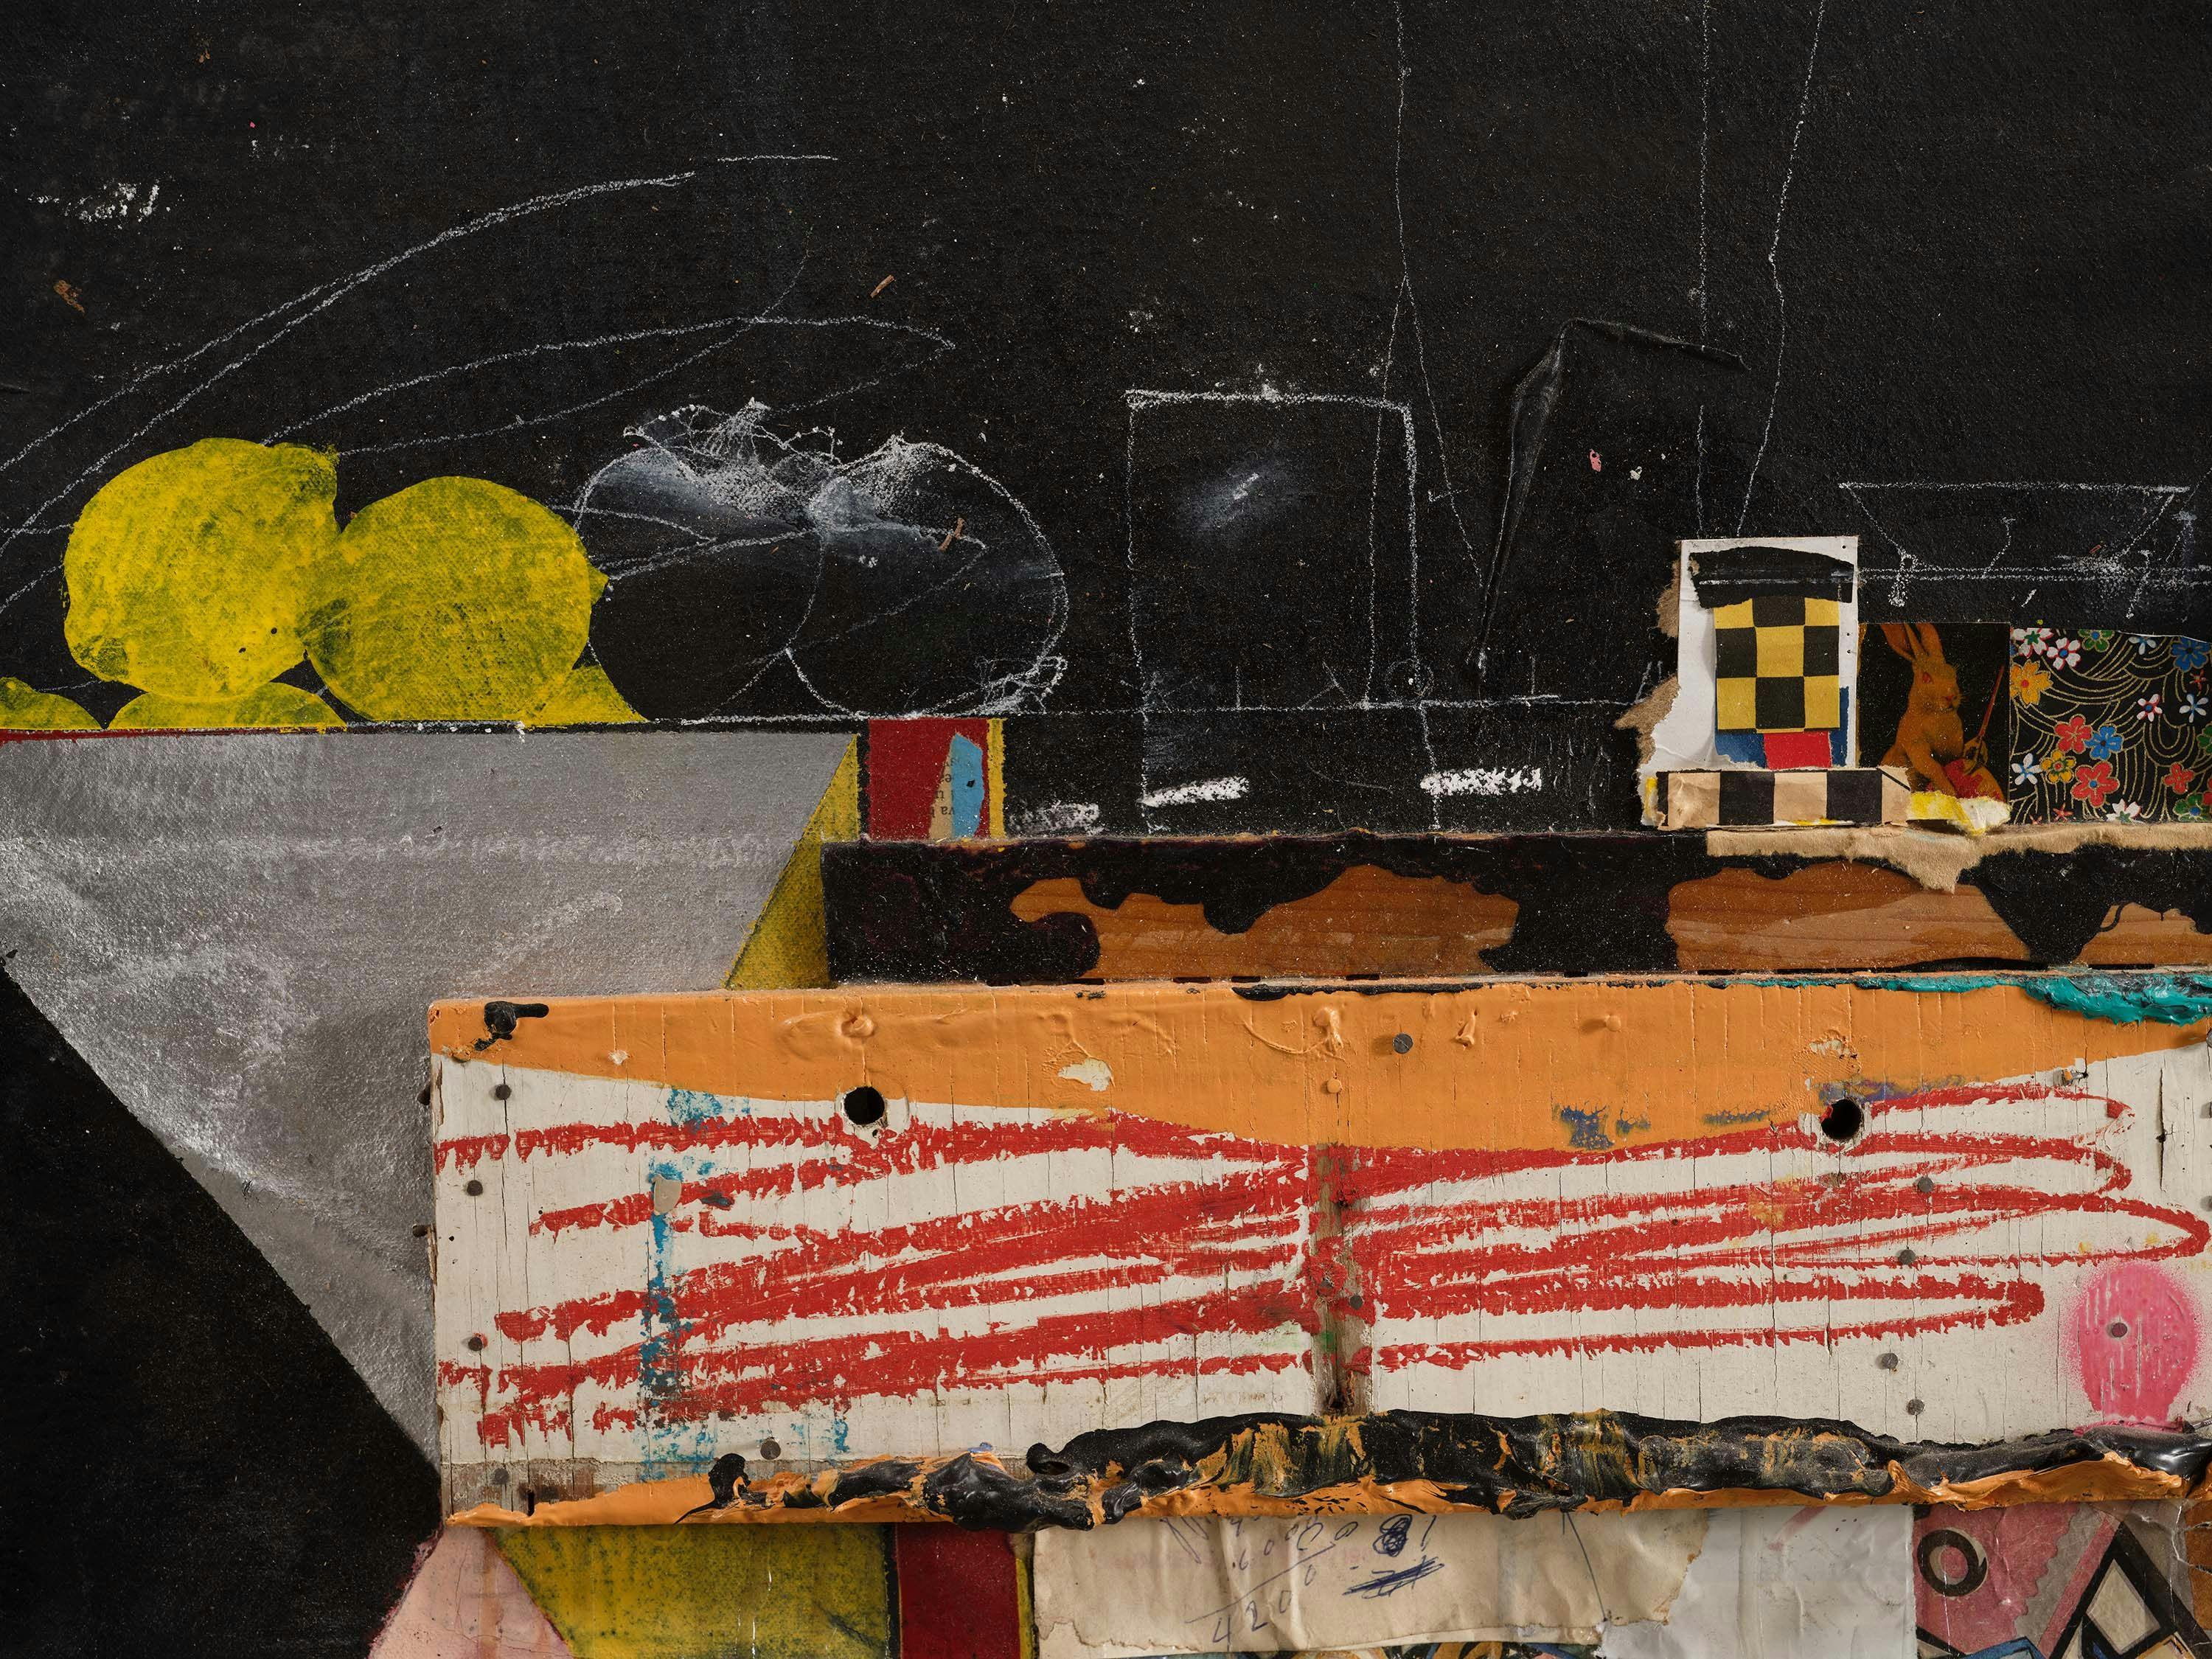 A detail from a mixed media artwork by Raymond Saunders, titled Jacob Lawrence, Romare Bearden, American Painting, dated 1988.